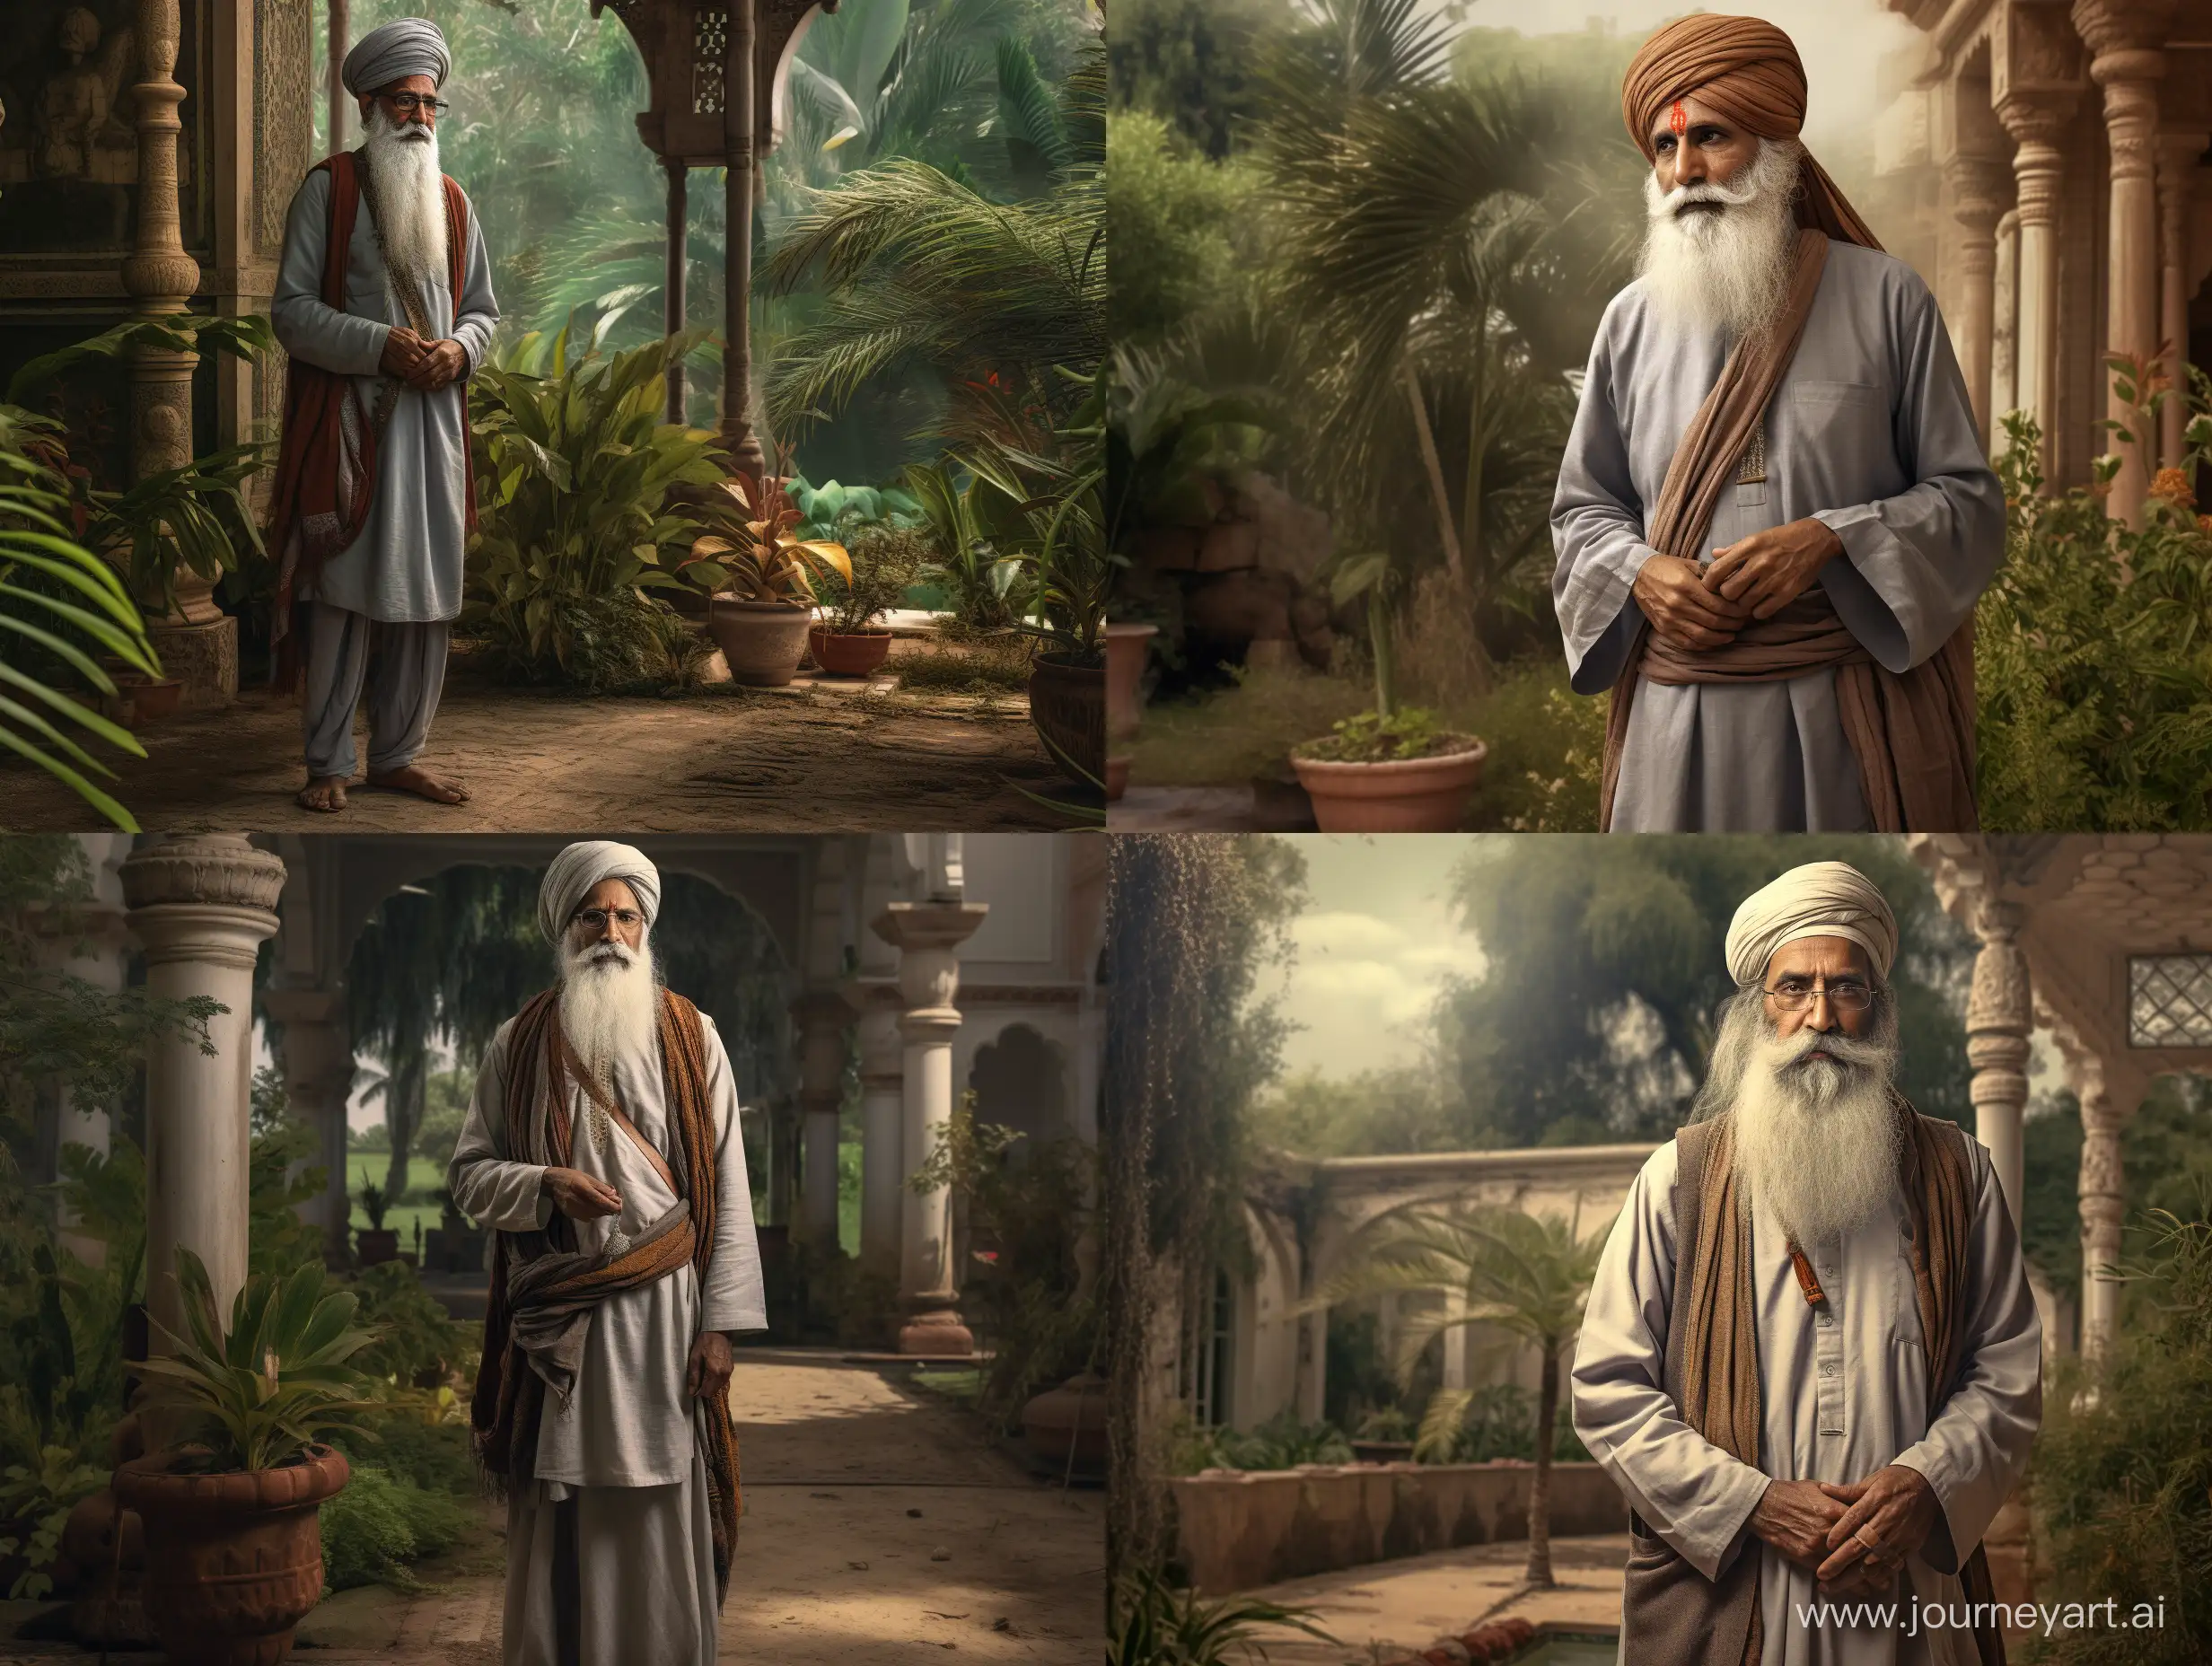 Old indian man, 60 years old, standing in old indian garden, late 19th century, indian architecture, old man with glasses and large grey beard, patchy clothes, long indian clothes, turban on head, glasses, vintage, realistic, uhd, 4k, hyper realistic, full body image, cane